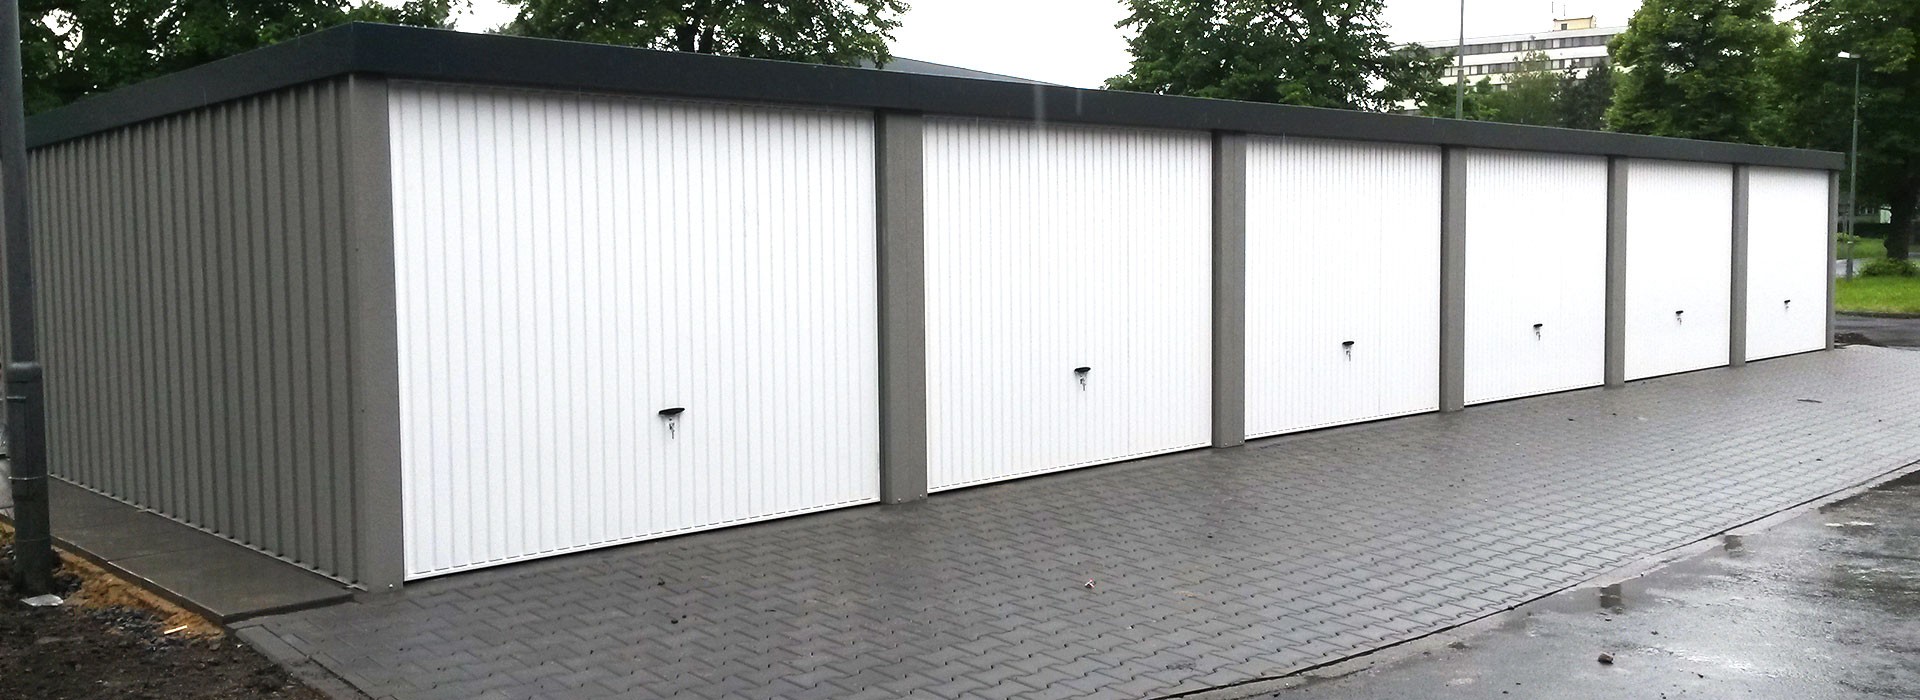 Garages for cars, motorbikes and garden tools, storage garages